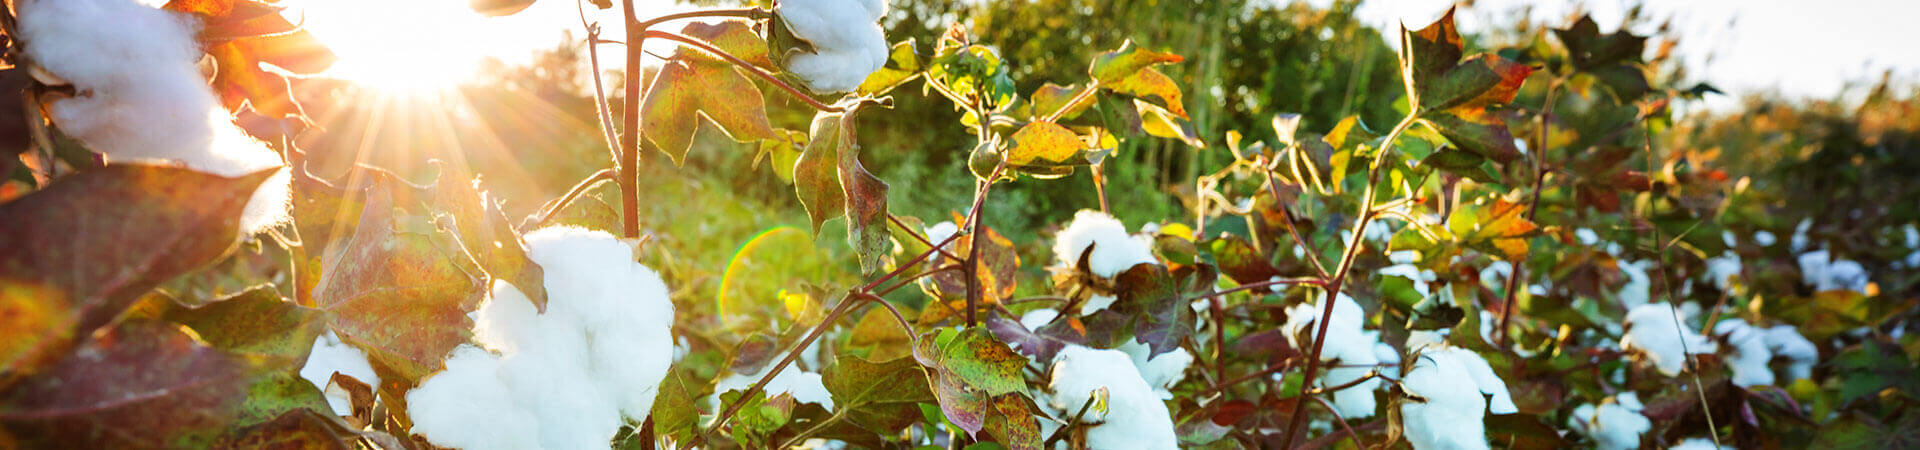 Close up of a cotton field.